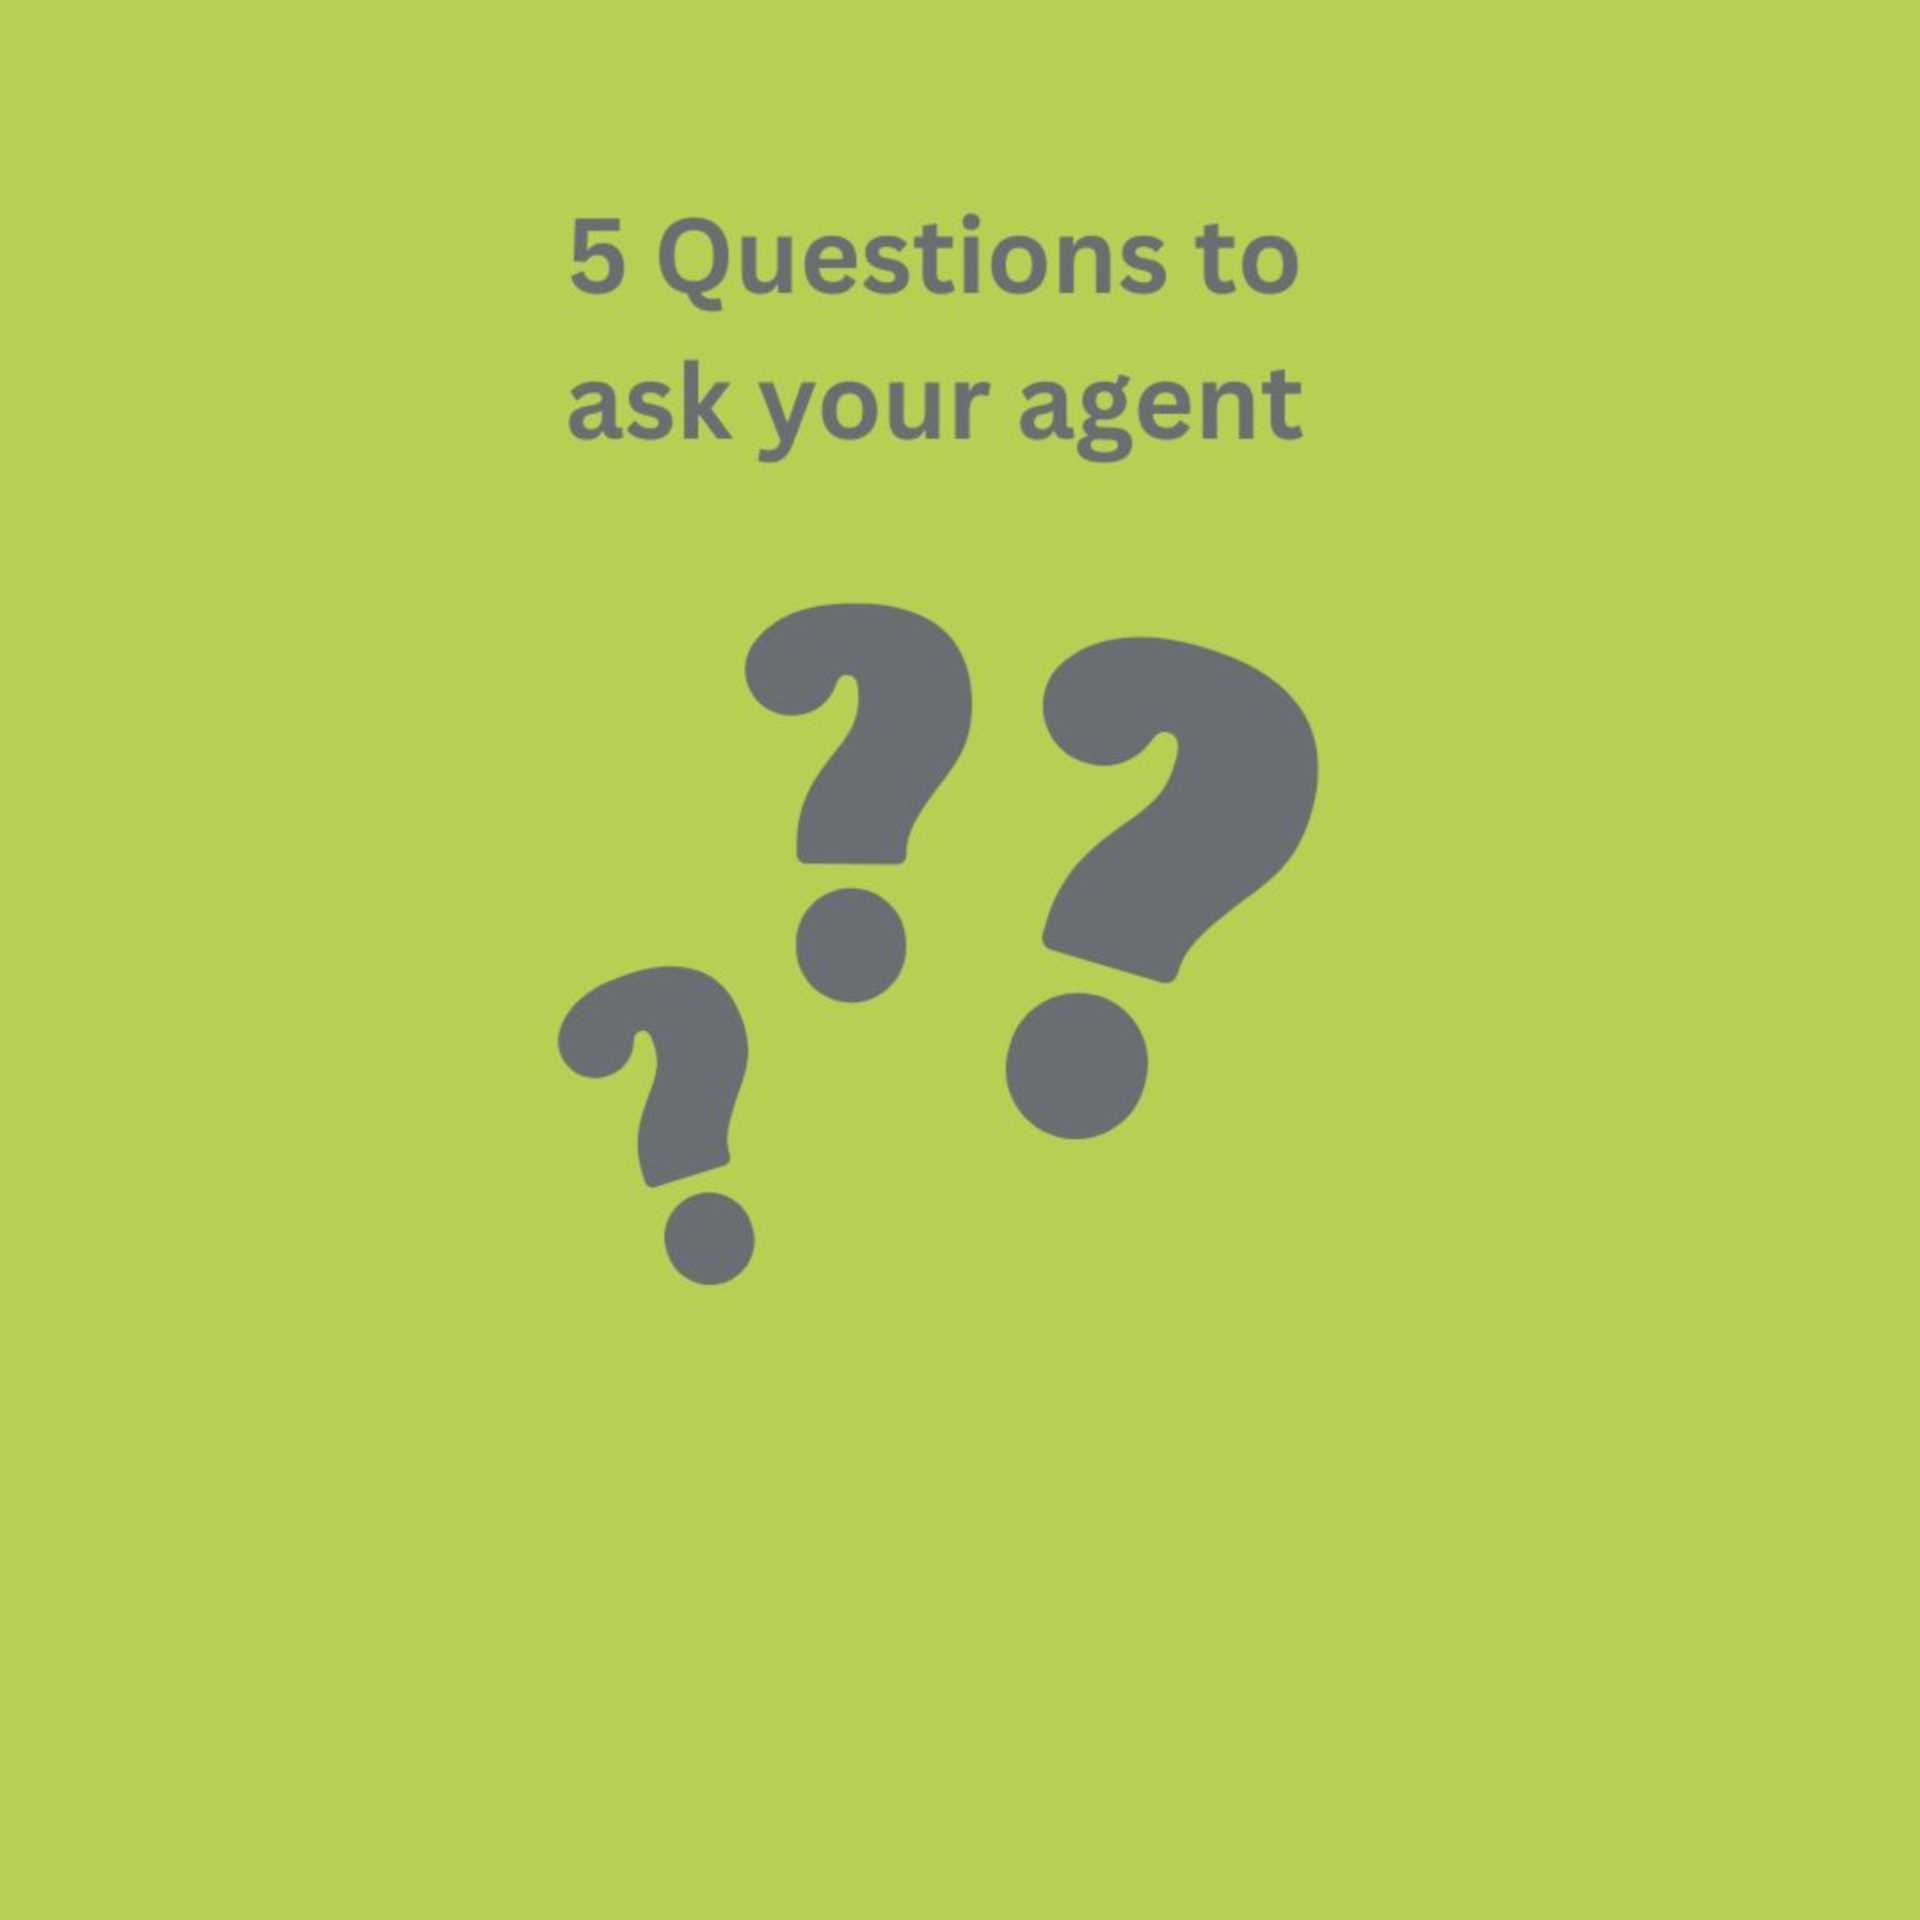 5 Questions sellers ask us about moving home